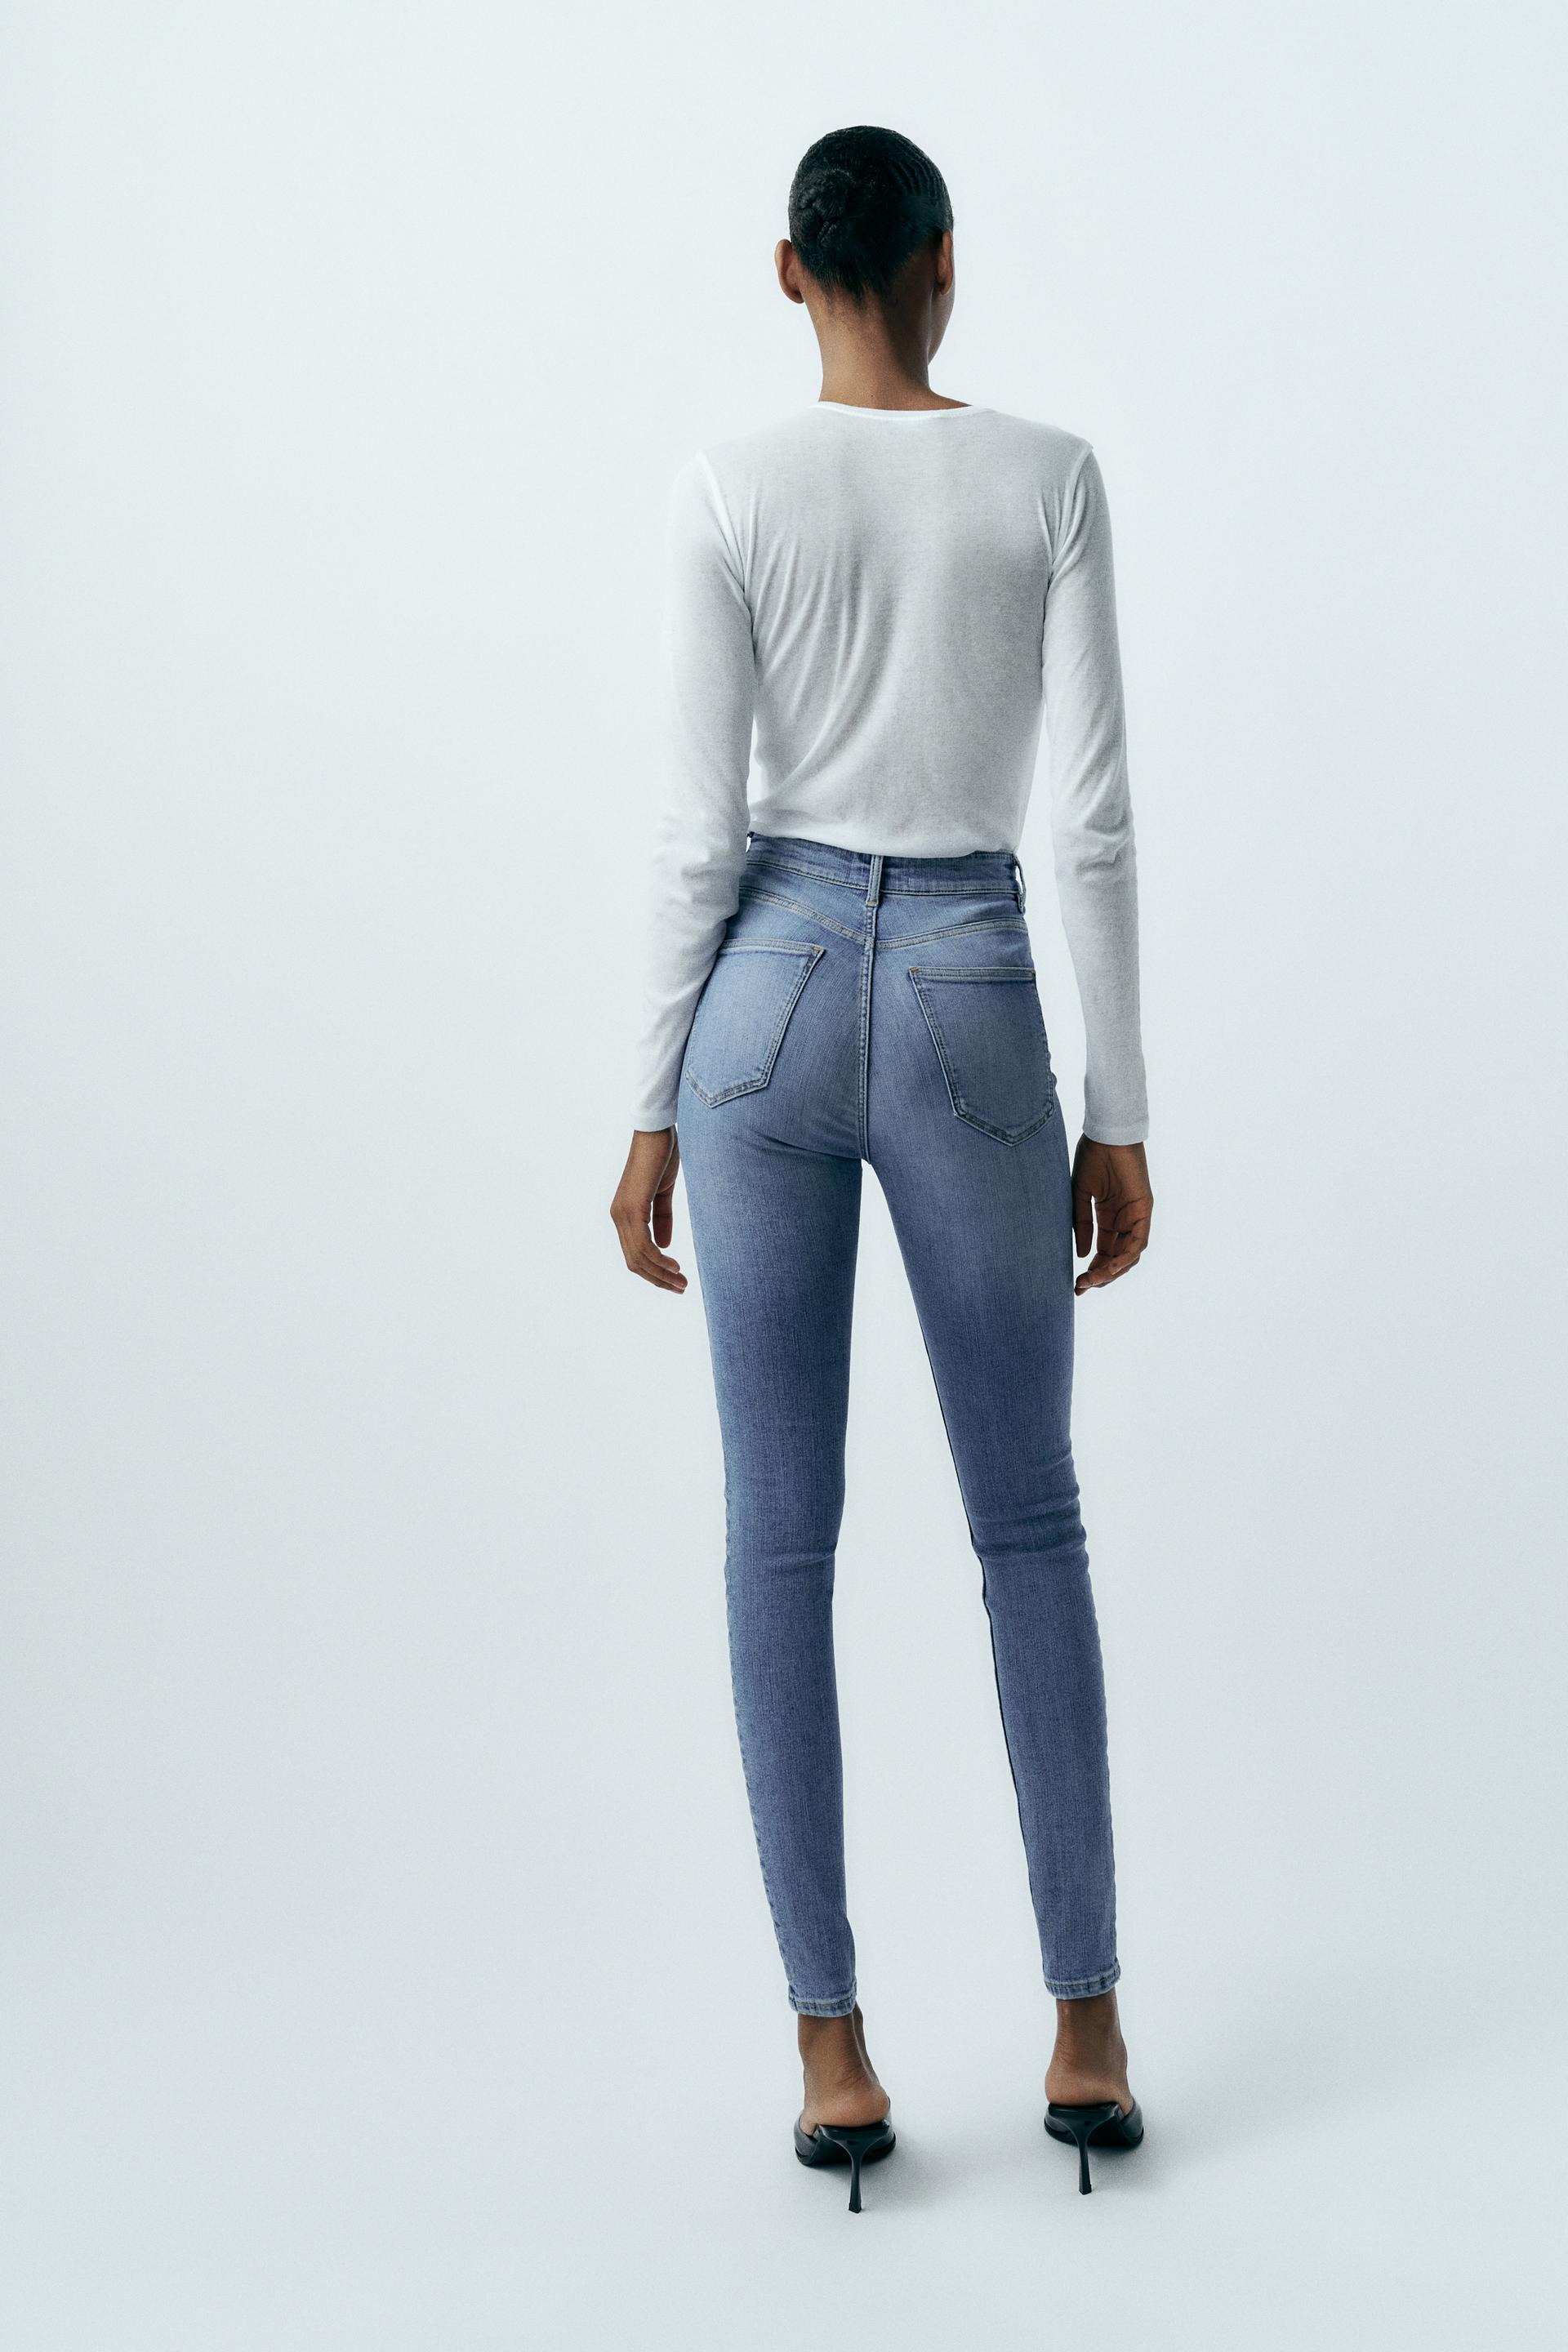 Yours Clothing CURVE DISTRESSED AVA LIFT AND SHAPE STRETCH - Jeans Skinny  Fit - blue - Zalando.de